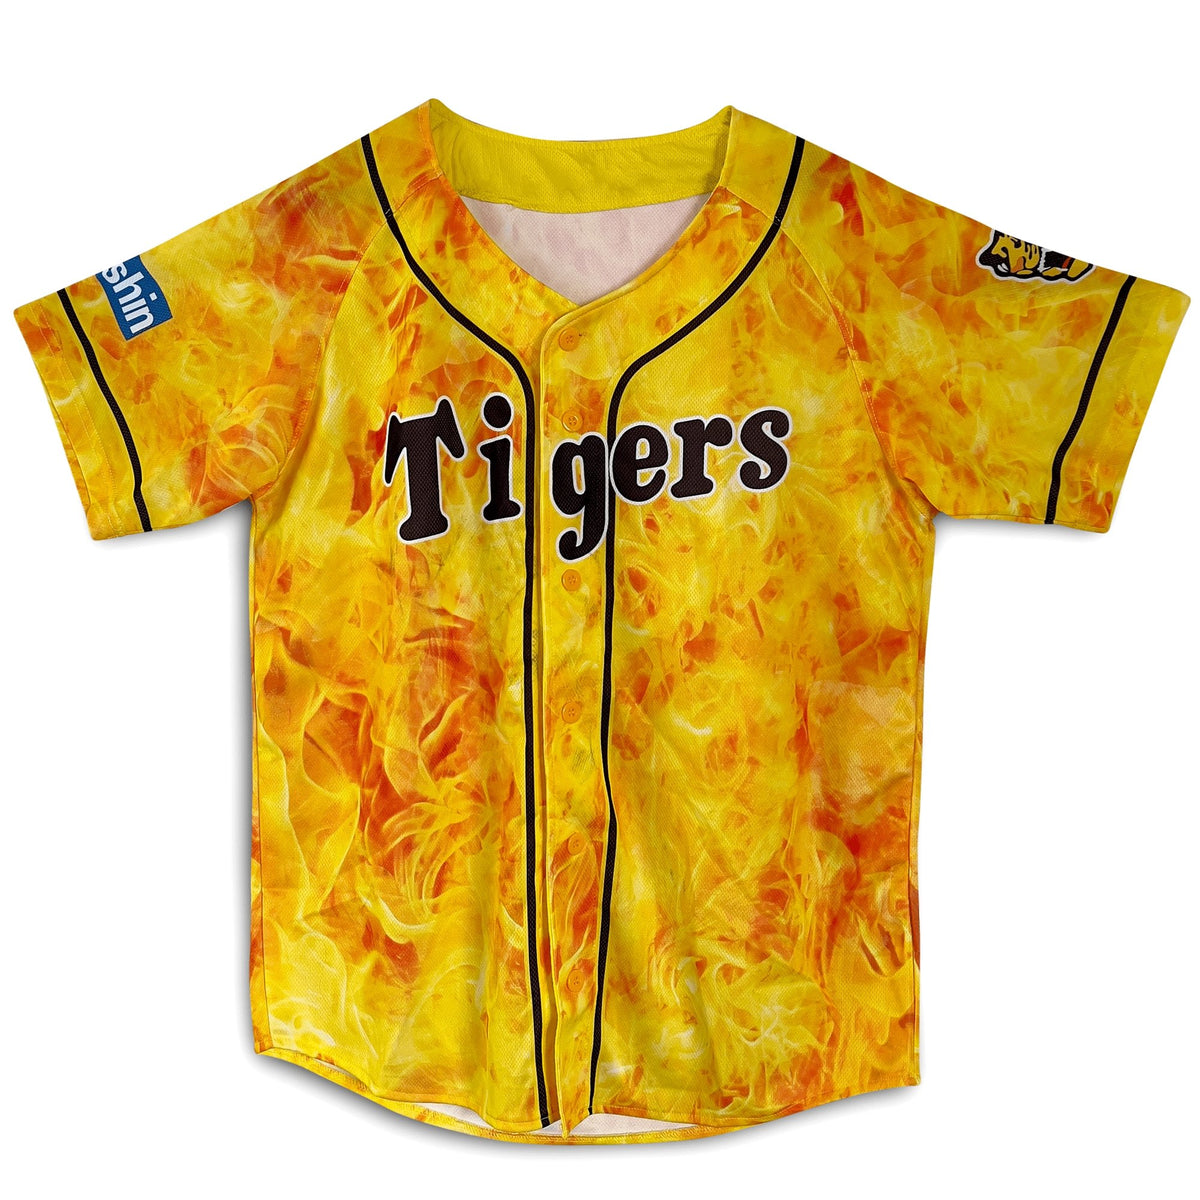 tigers signed jersey